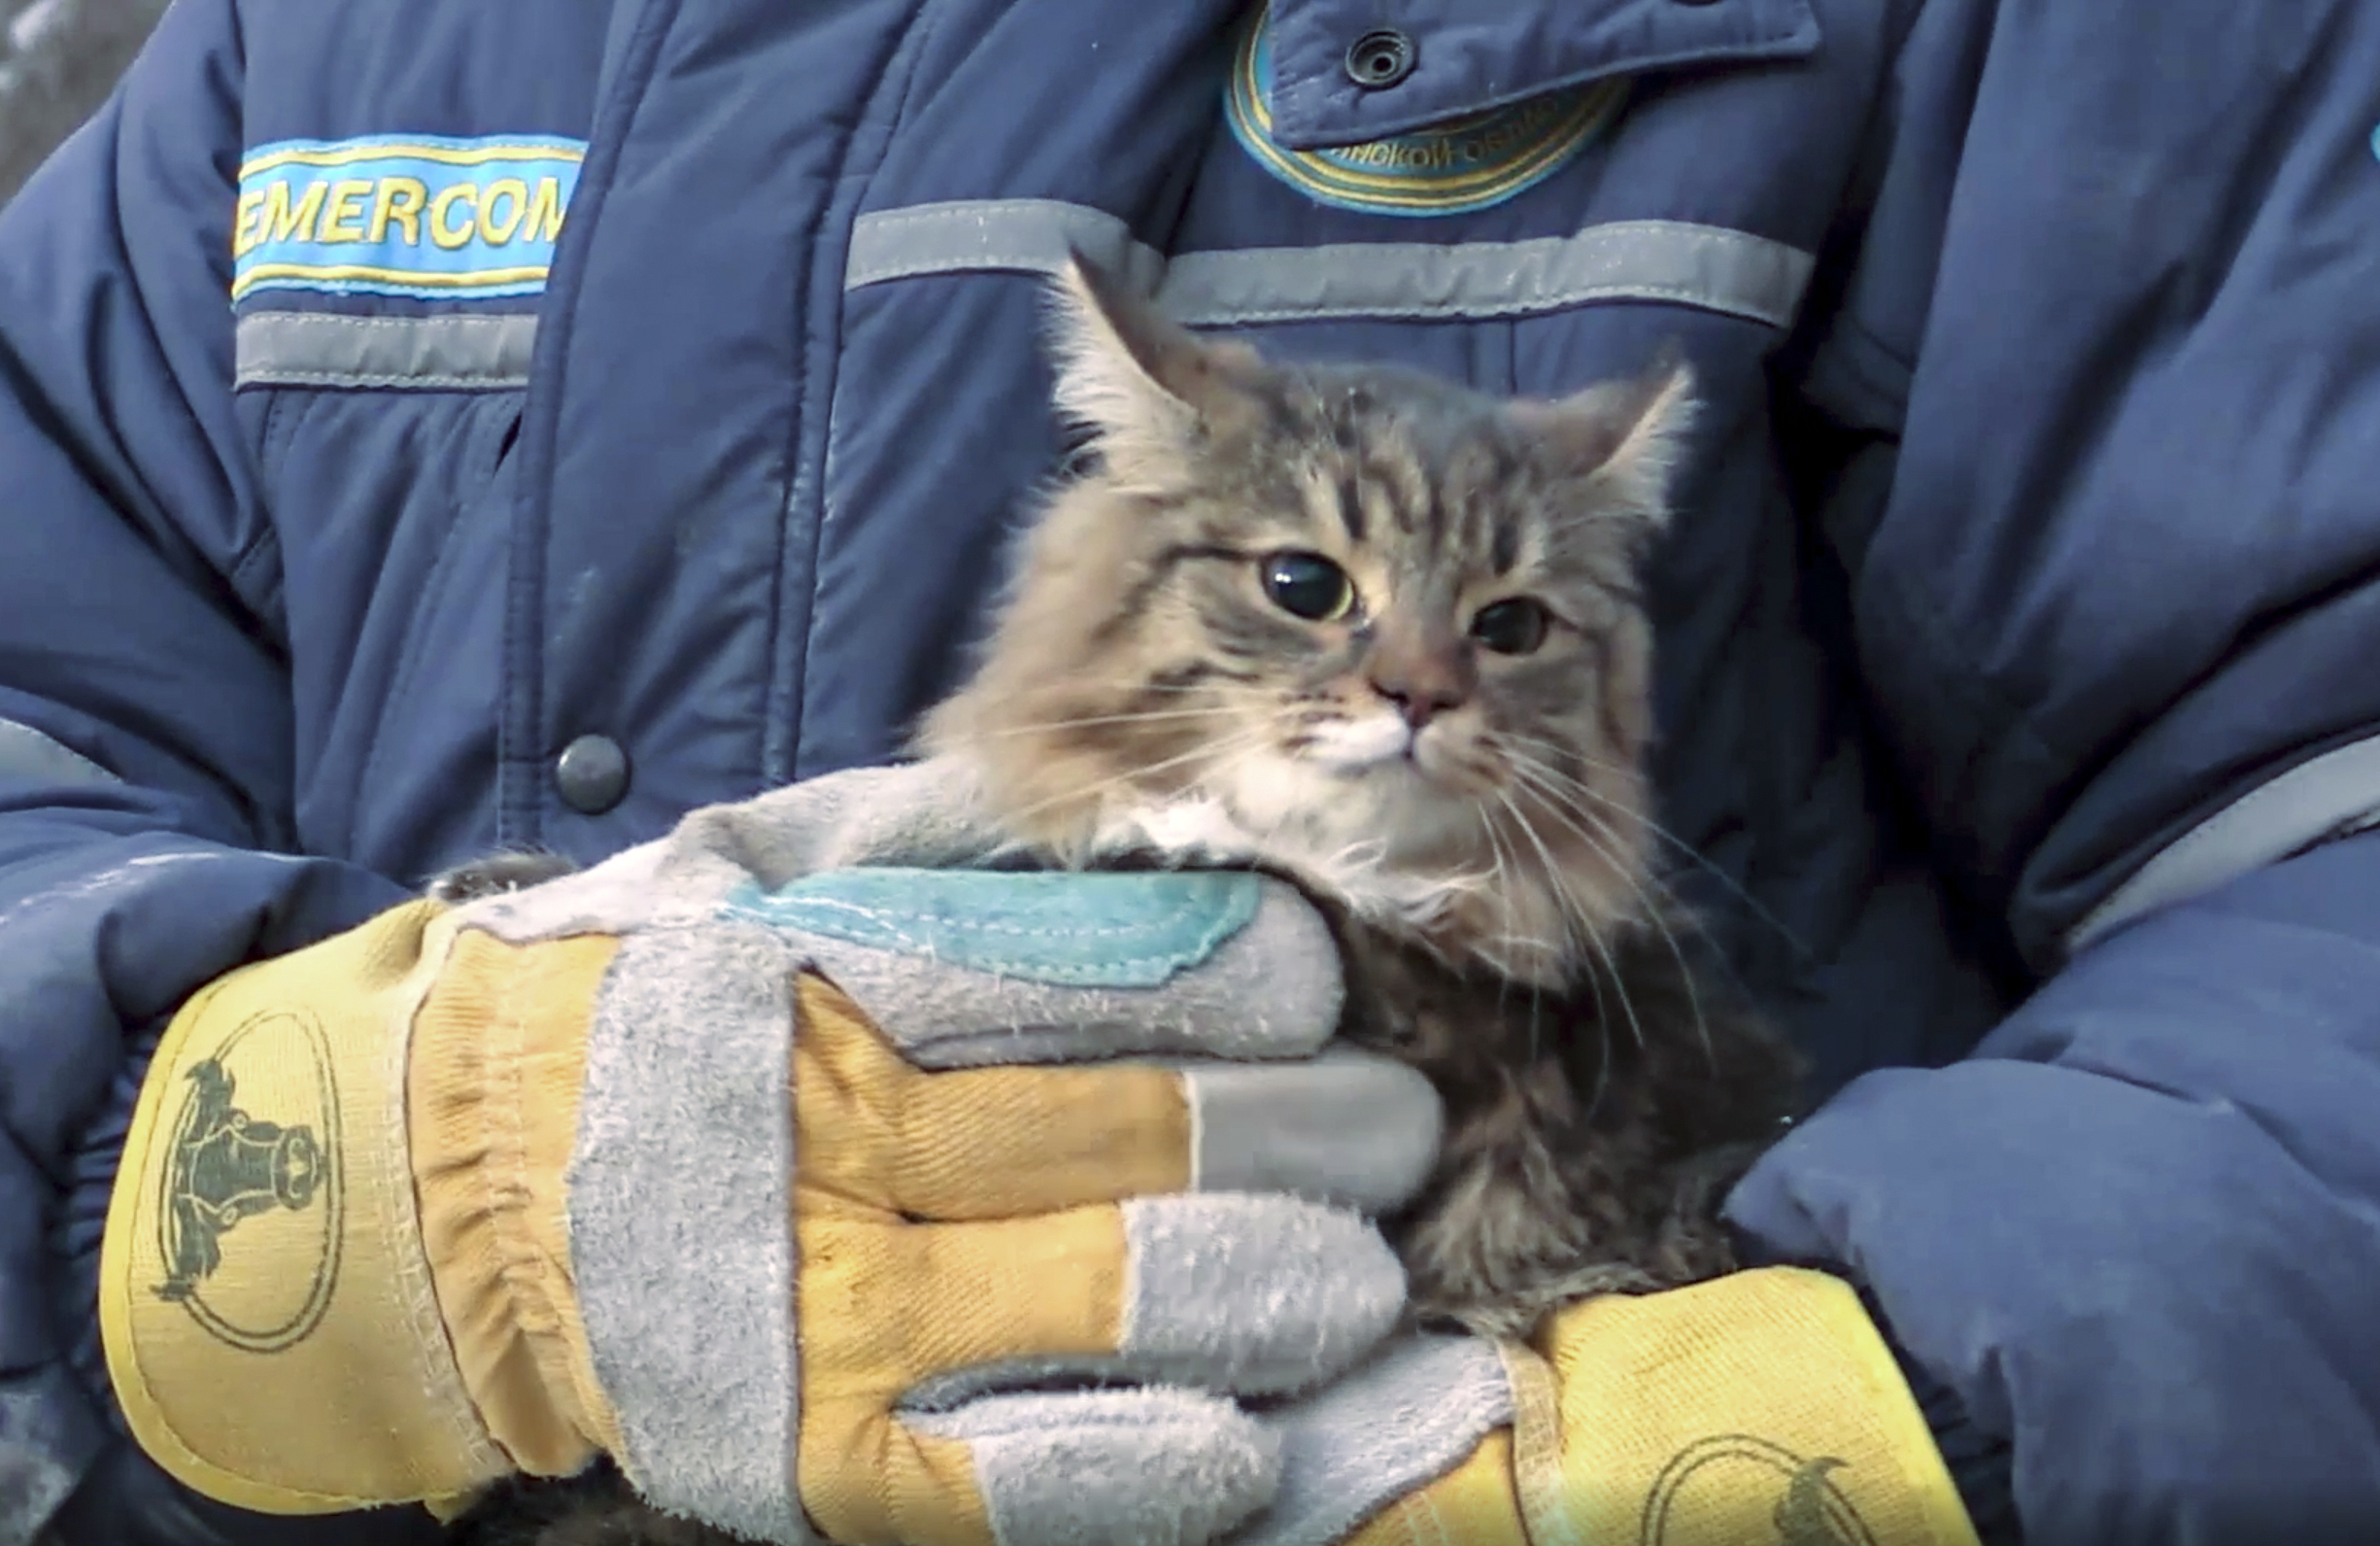 An Emergency Situations employee holding a cat rescued from debris 